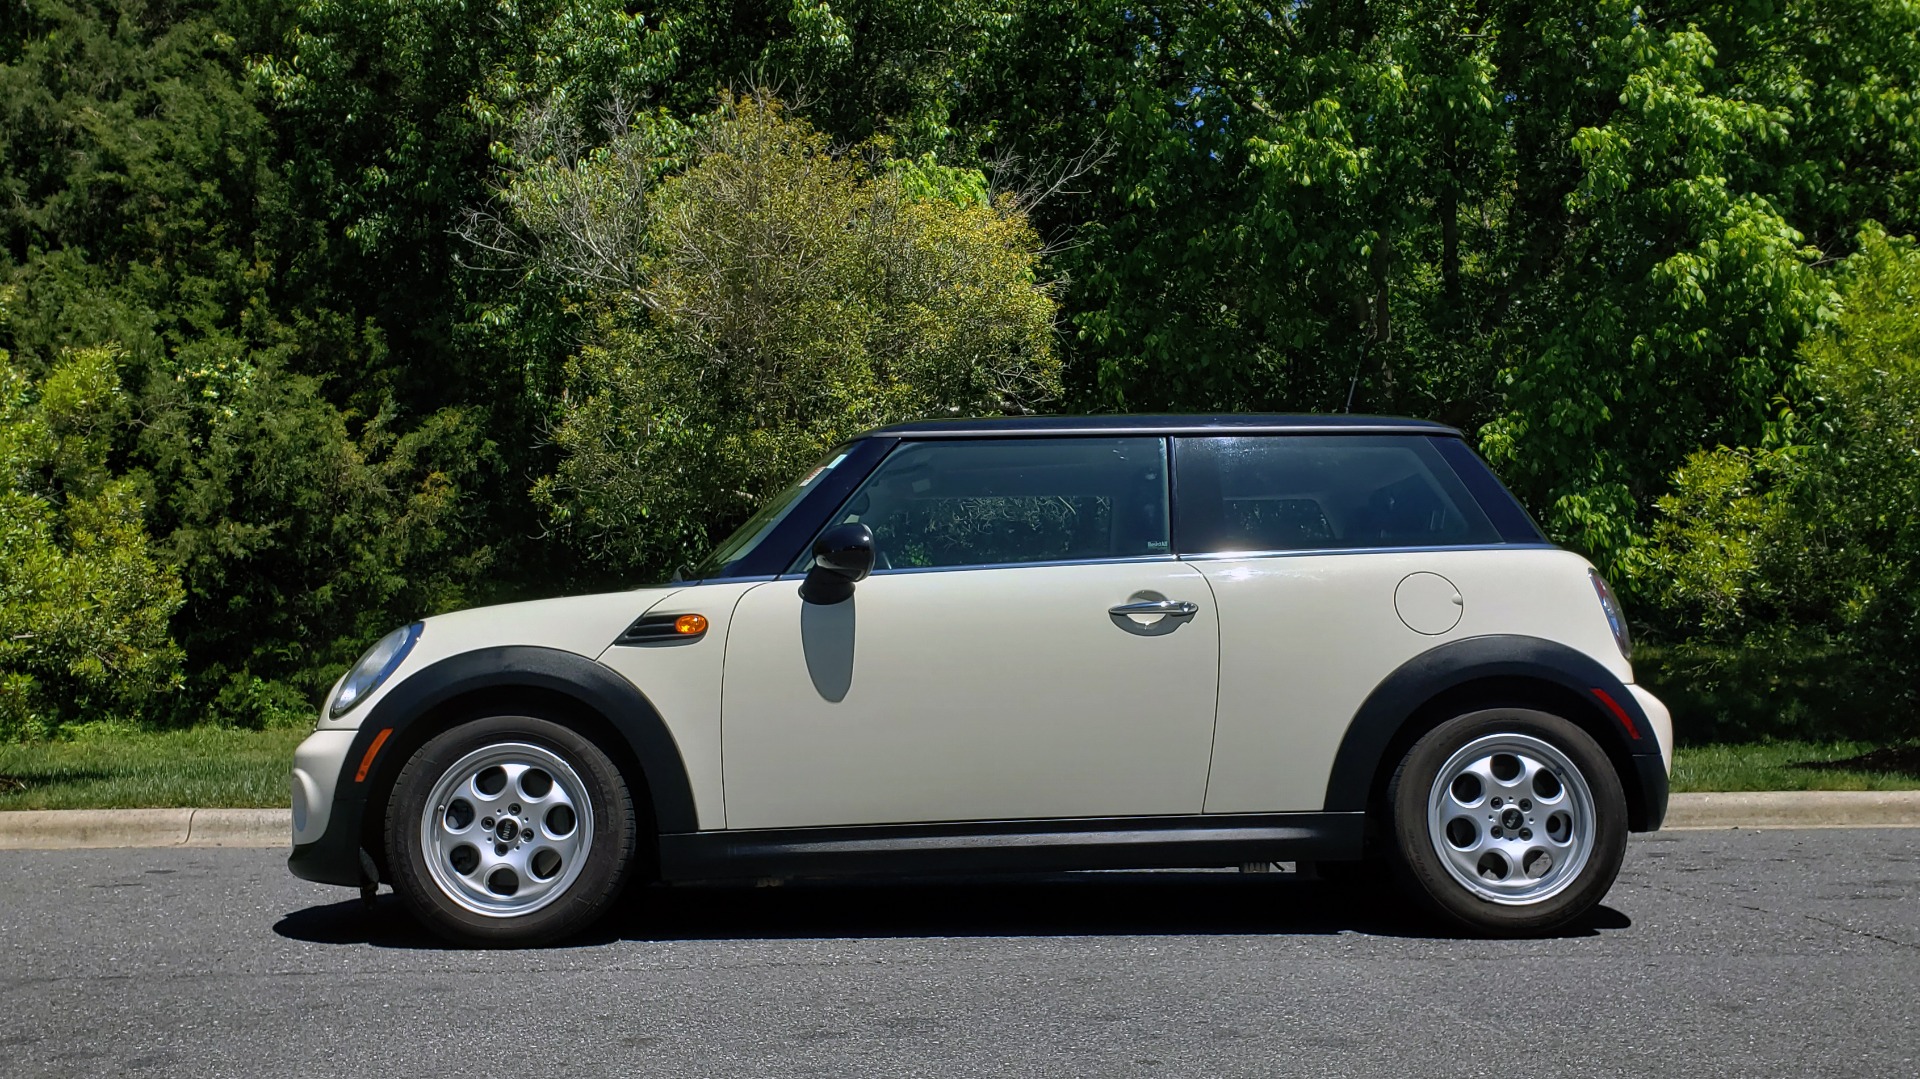 Used 2012 MINI COOPER HARDTOP 6-SPEED MANUAL / VERY CLEAN / 37 MPG for sale Sold at Formula Imports in Charlotte NC 28227 2